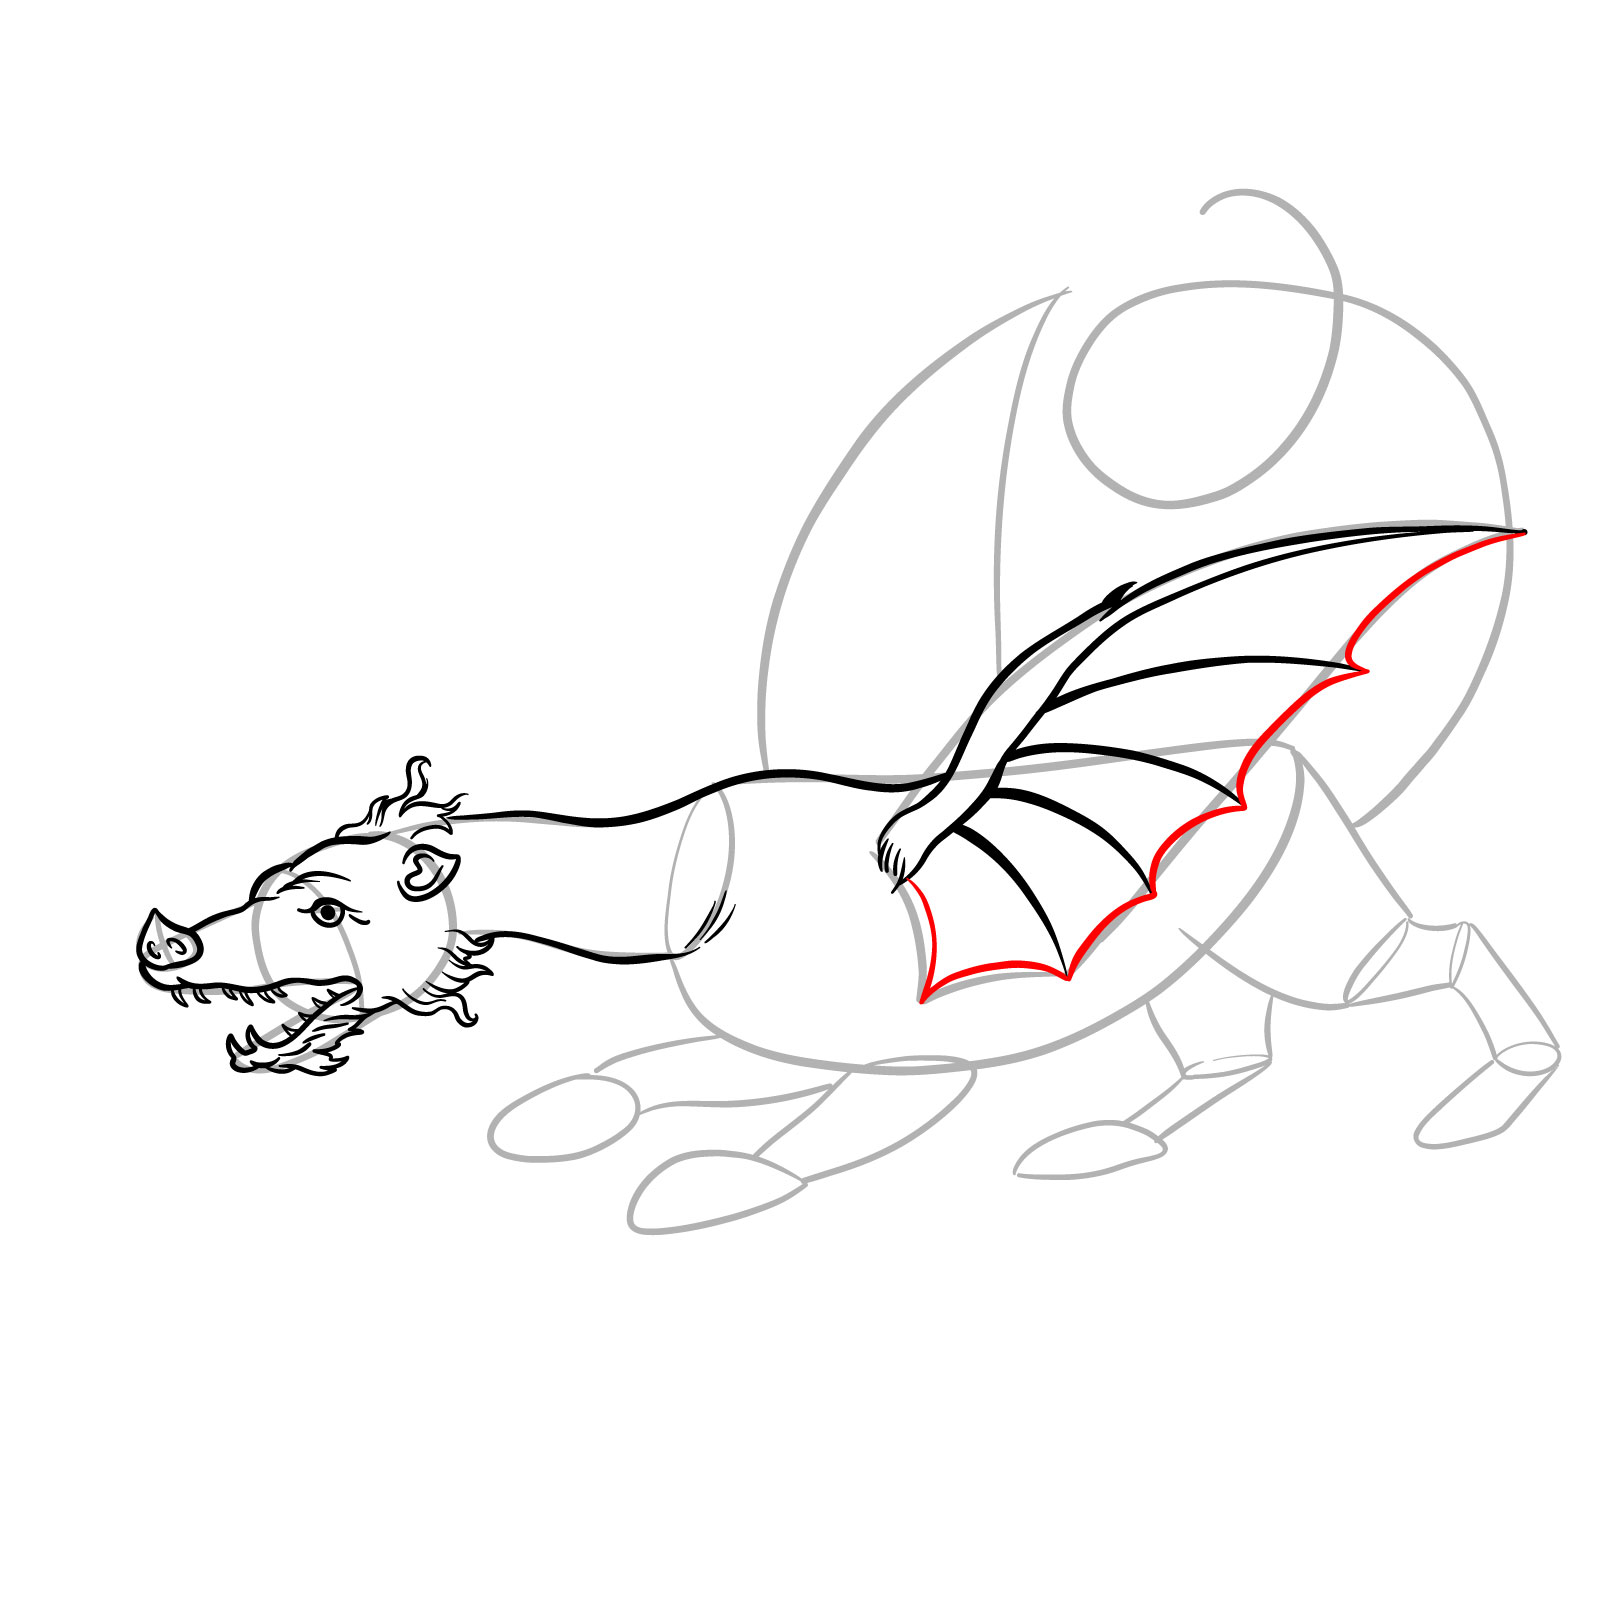 How to draw a classic European dragon - step 19